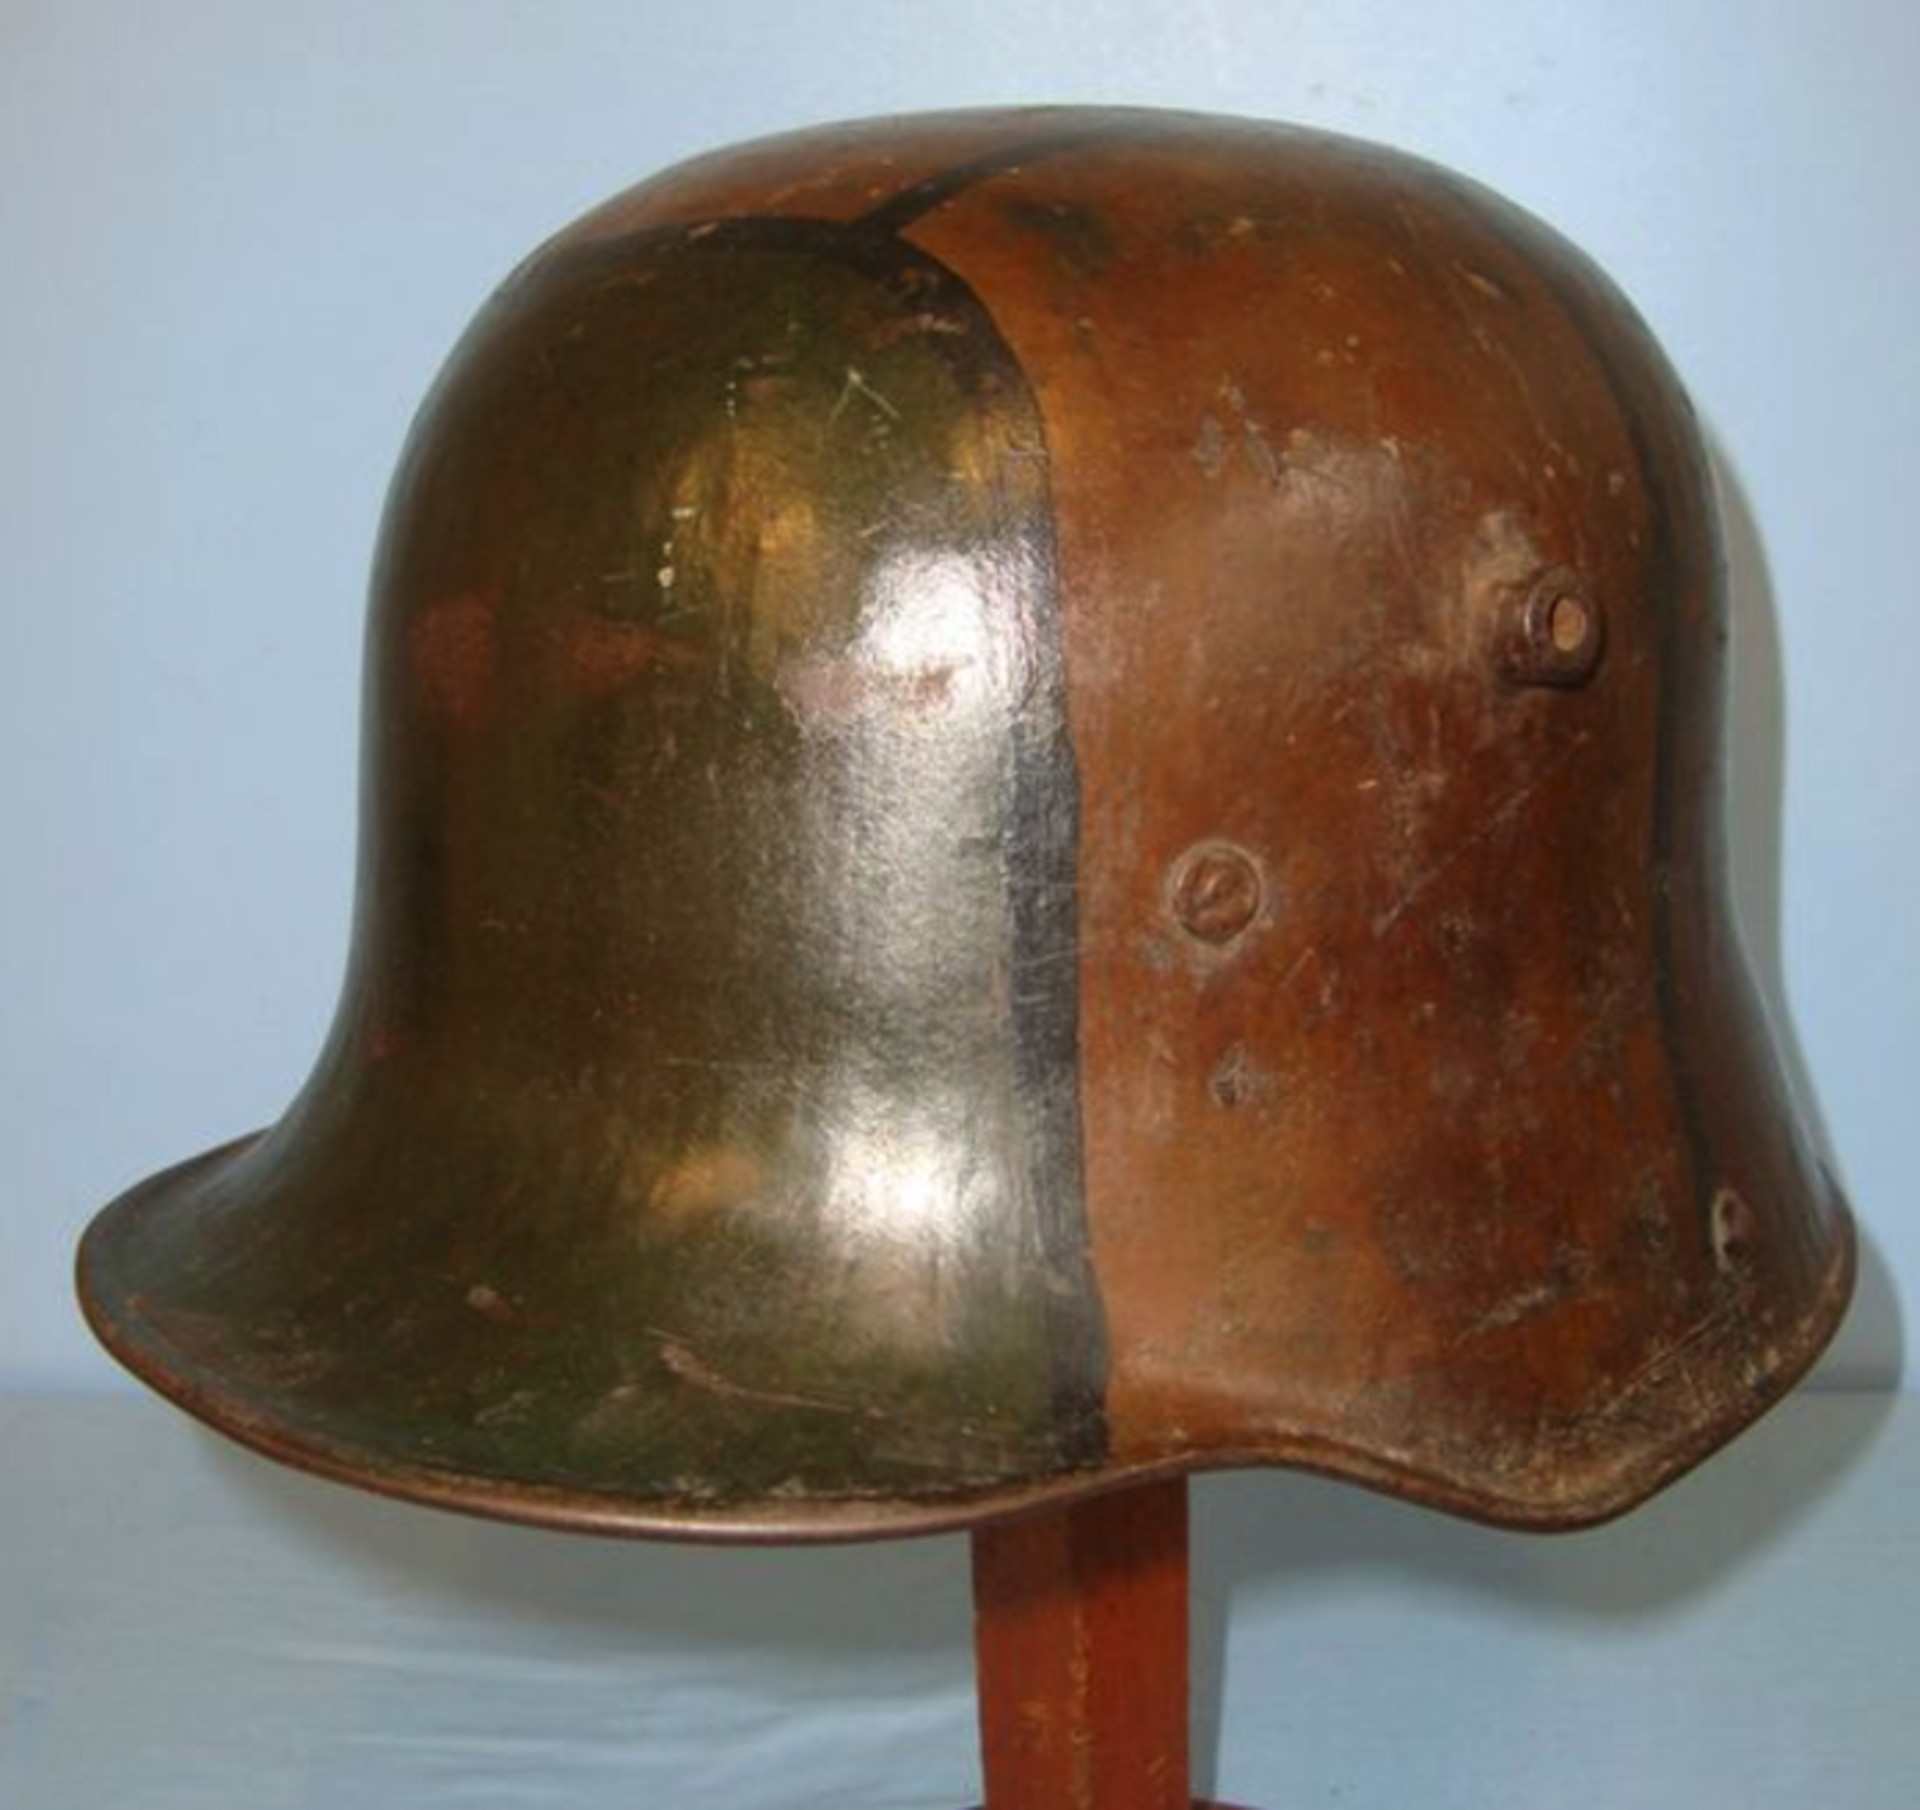 Rare, WW1 German M16 Combat Helmet With Original Sectional Camouflage Paint & Padded Liner. - Image 2 of 3